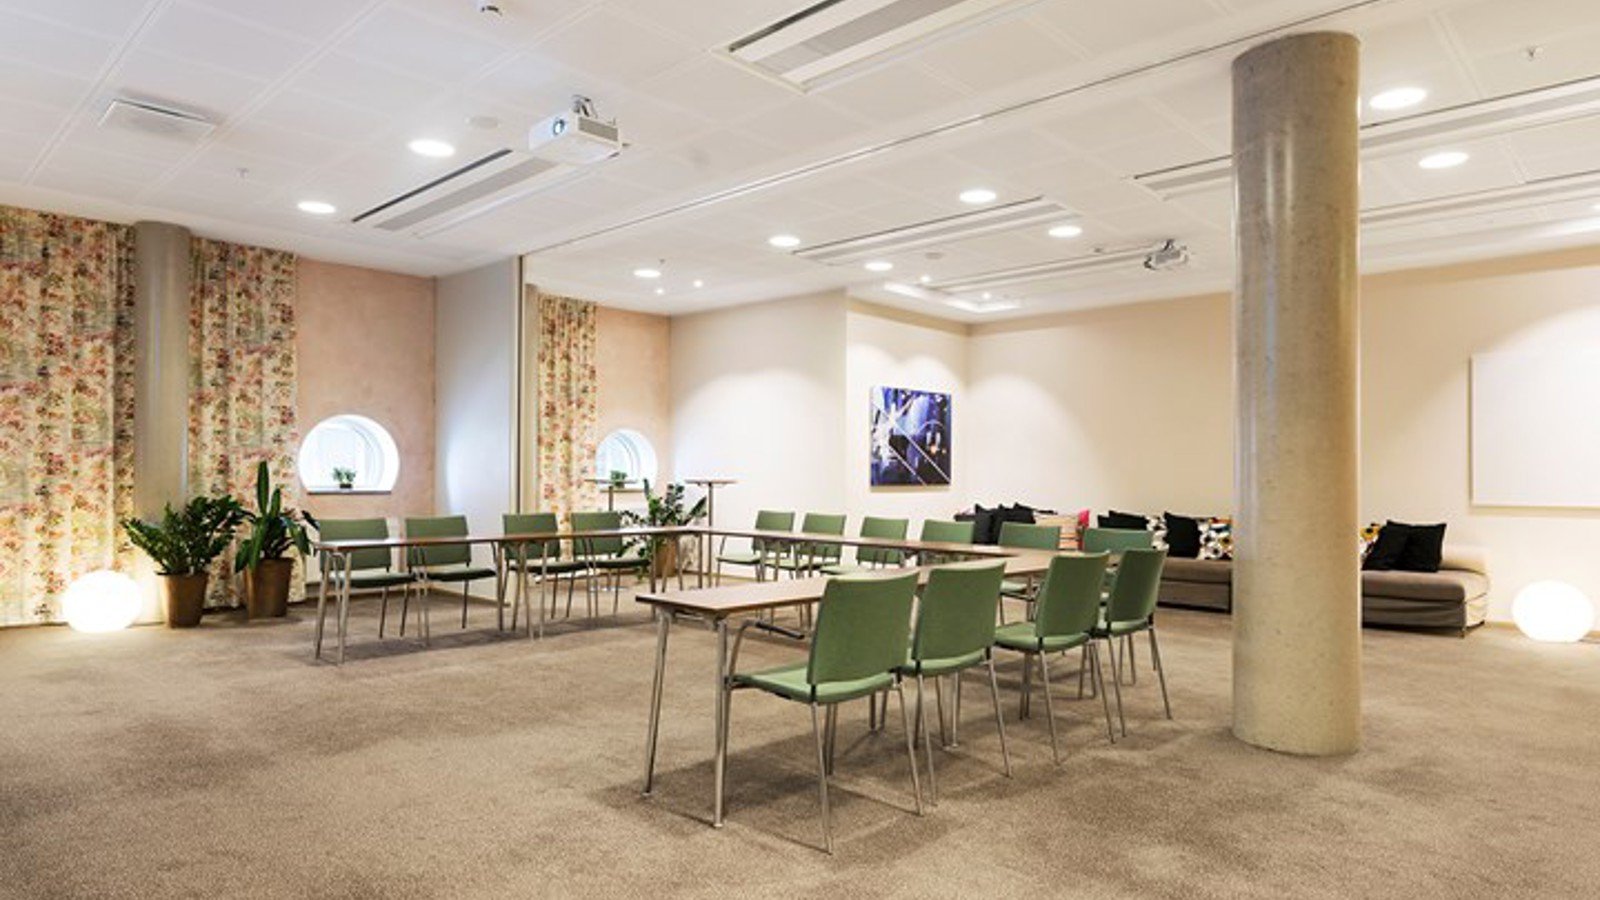 Conference room with u-shaped seating, light brown floor, green chairs and patterned draperies